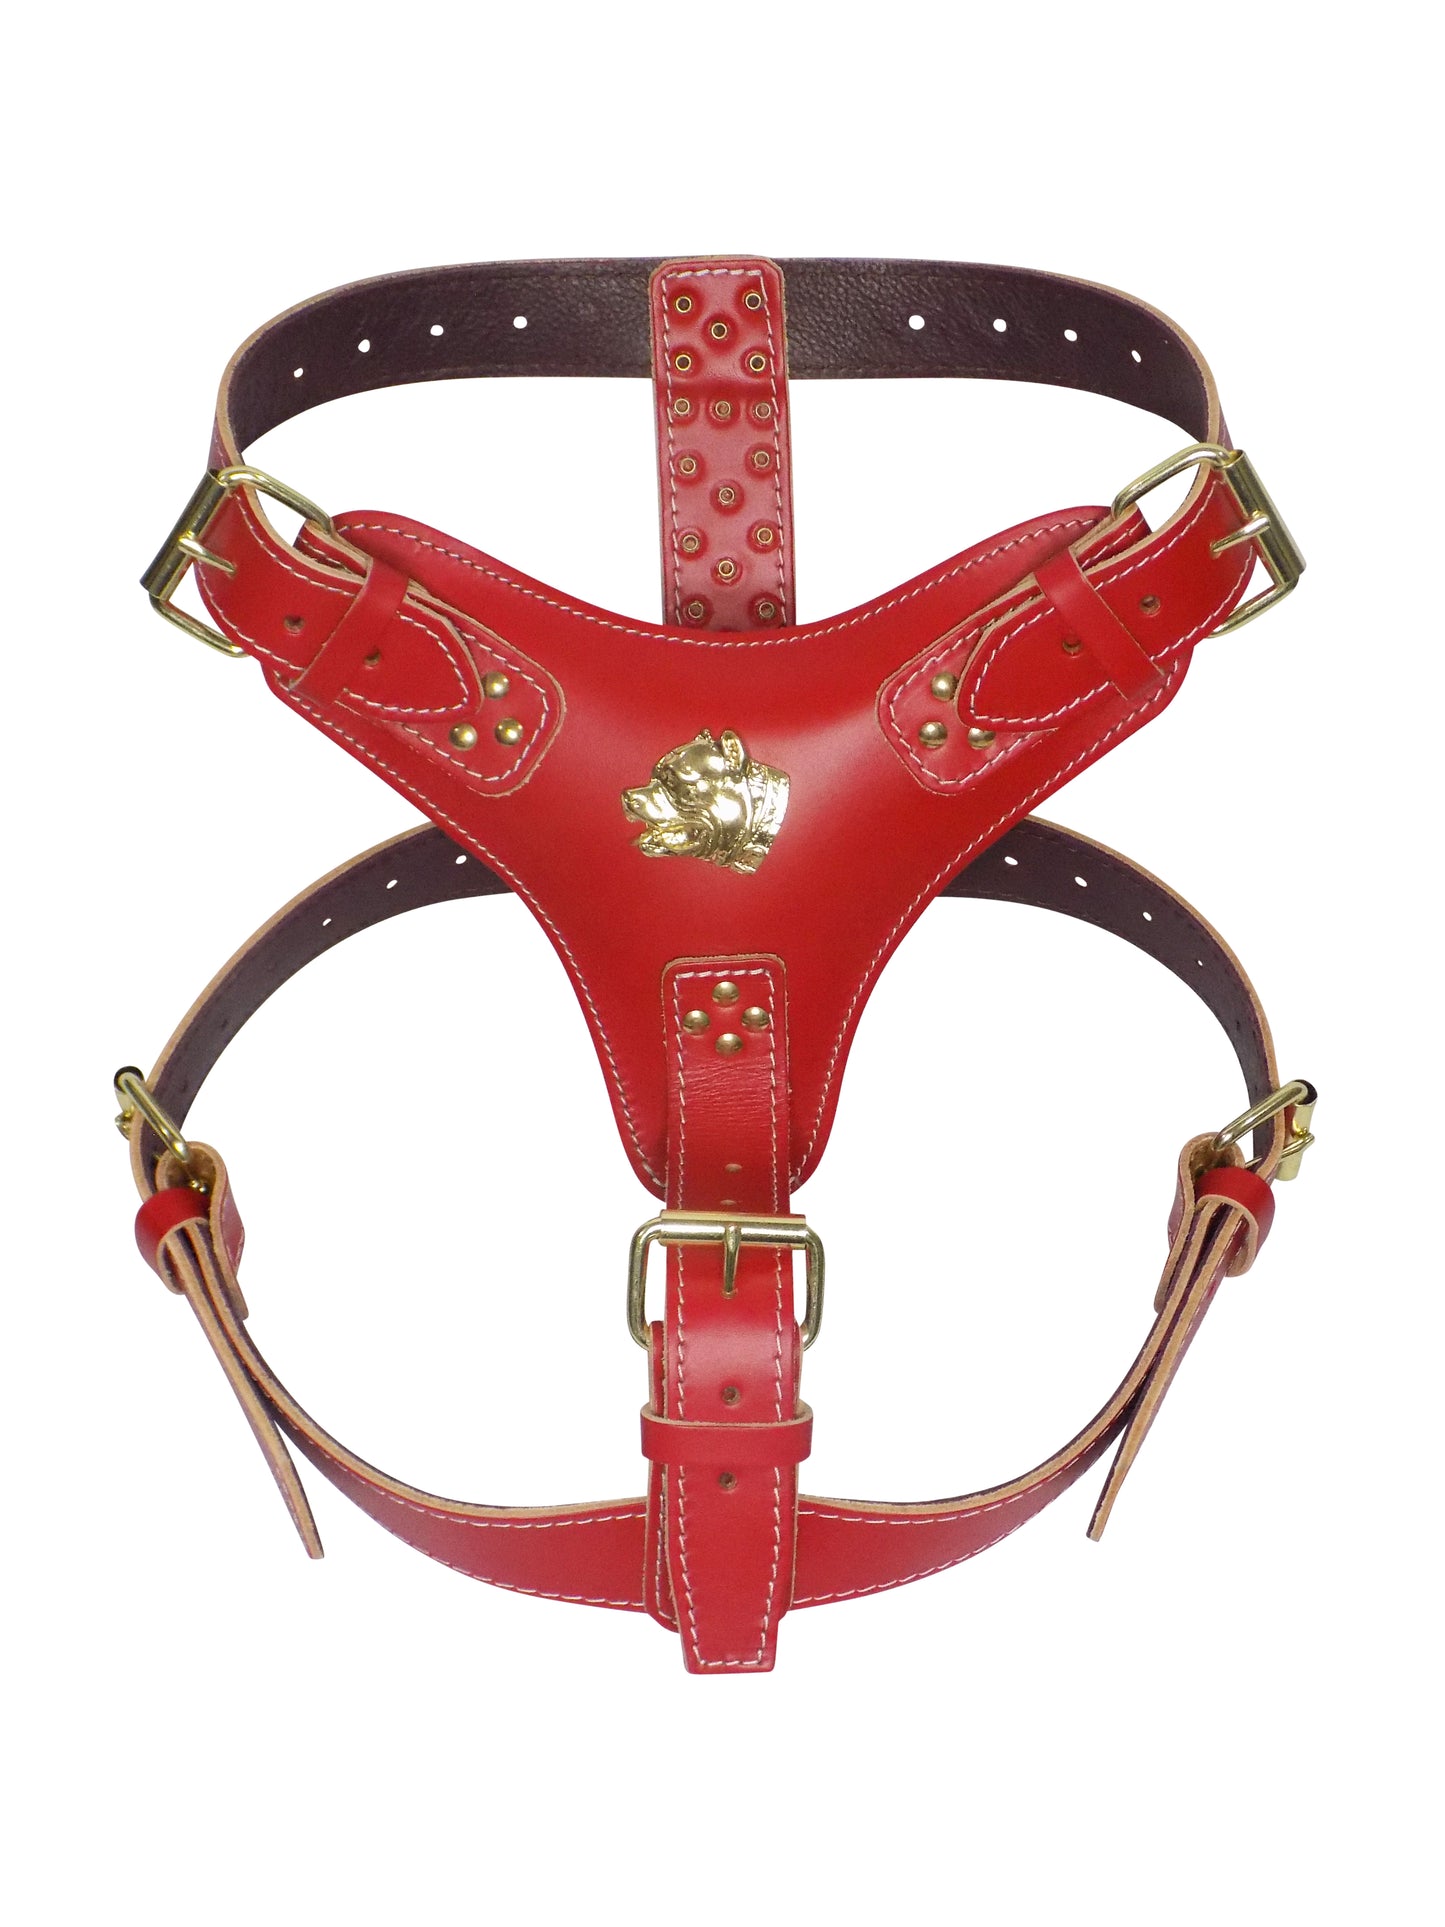 Extra Large Heavy Duty Leather Dog Harness with Gold American Bully Head Motif